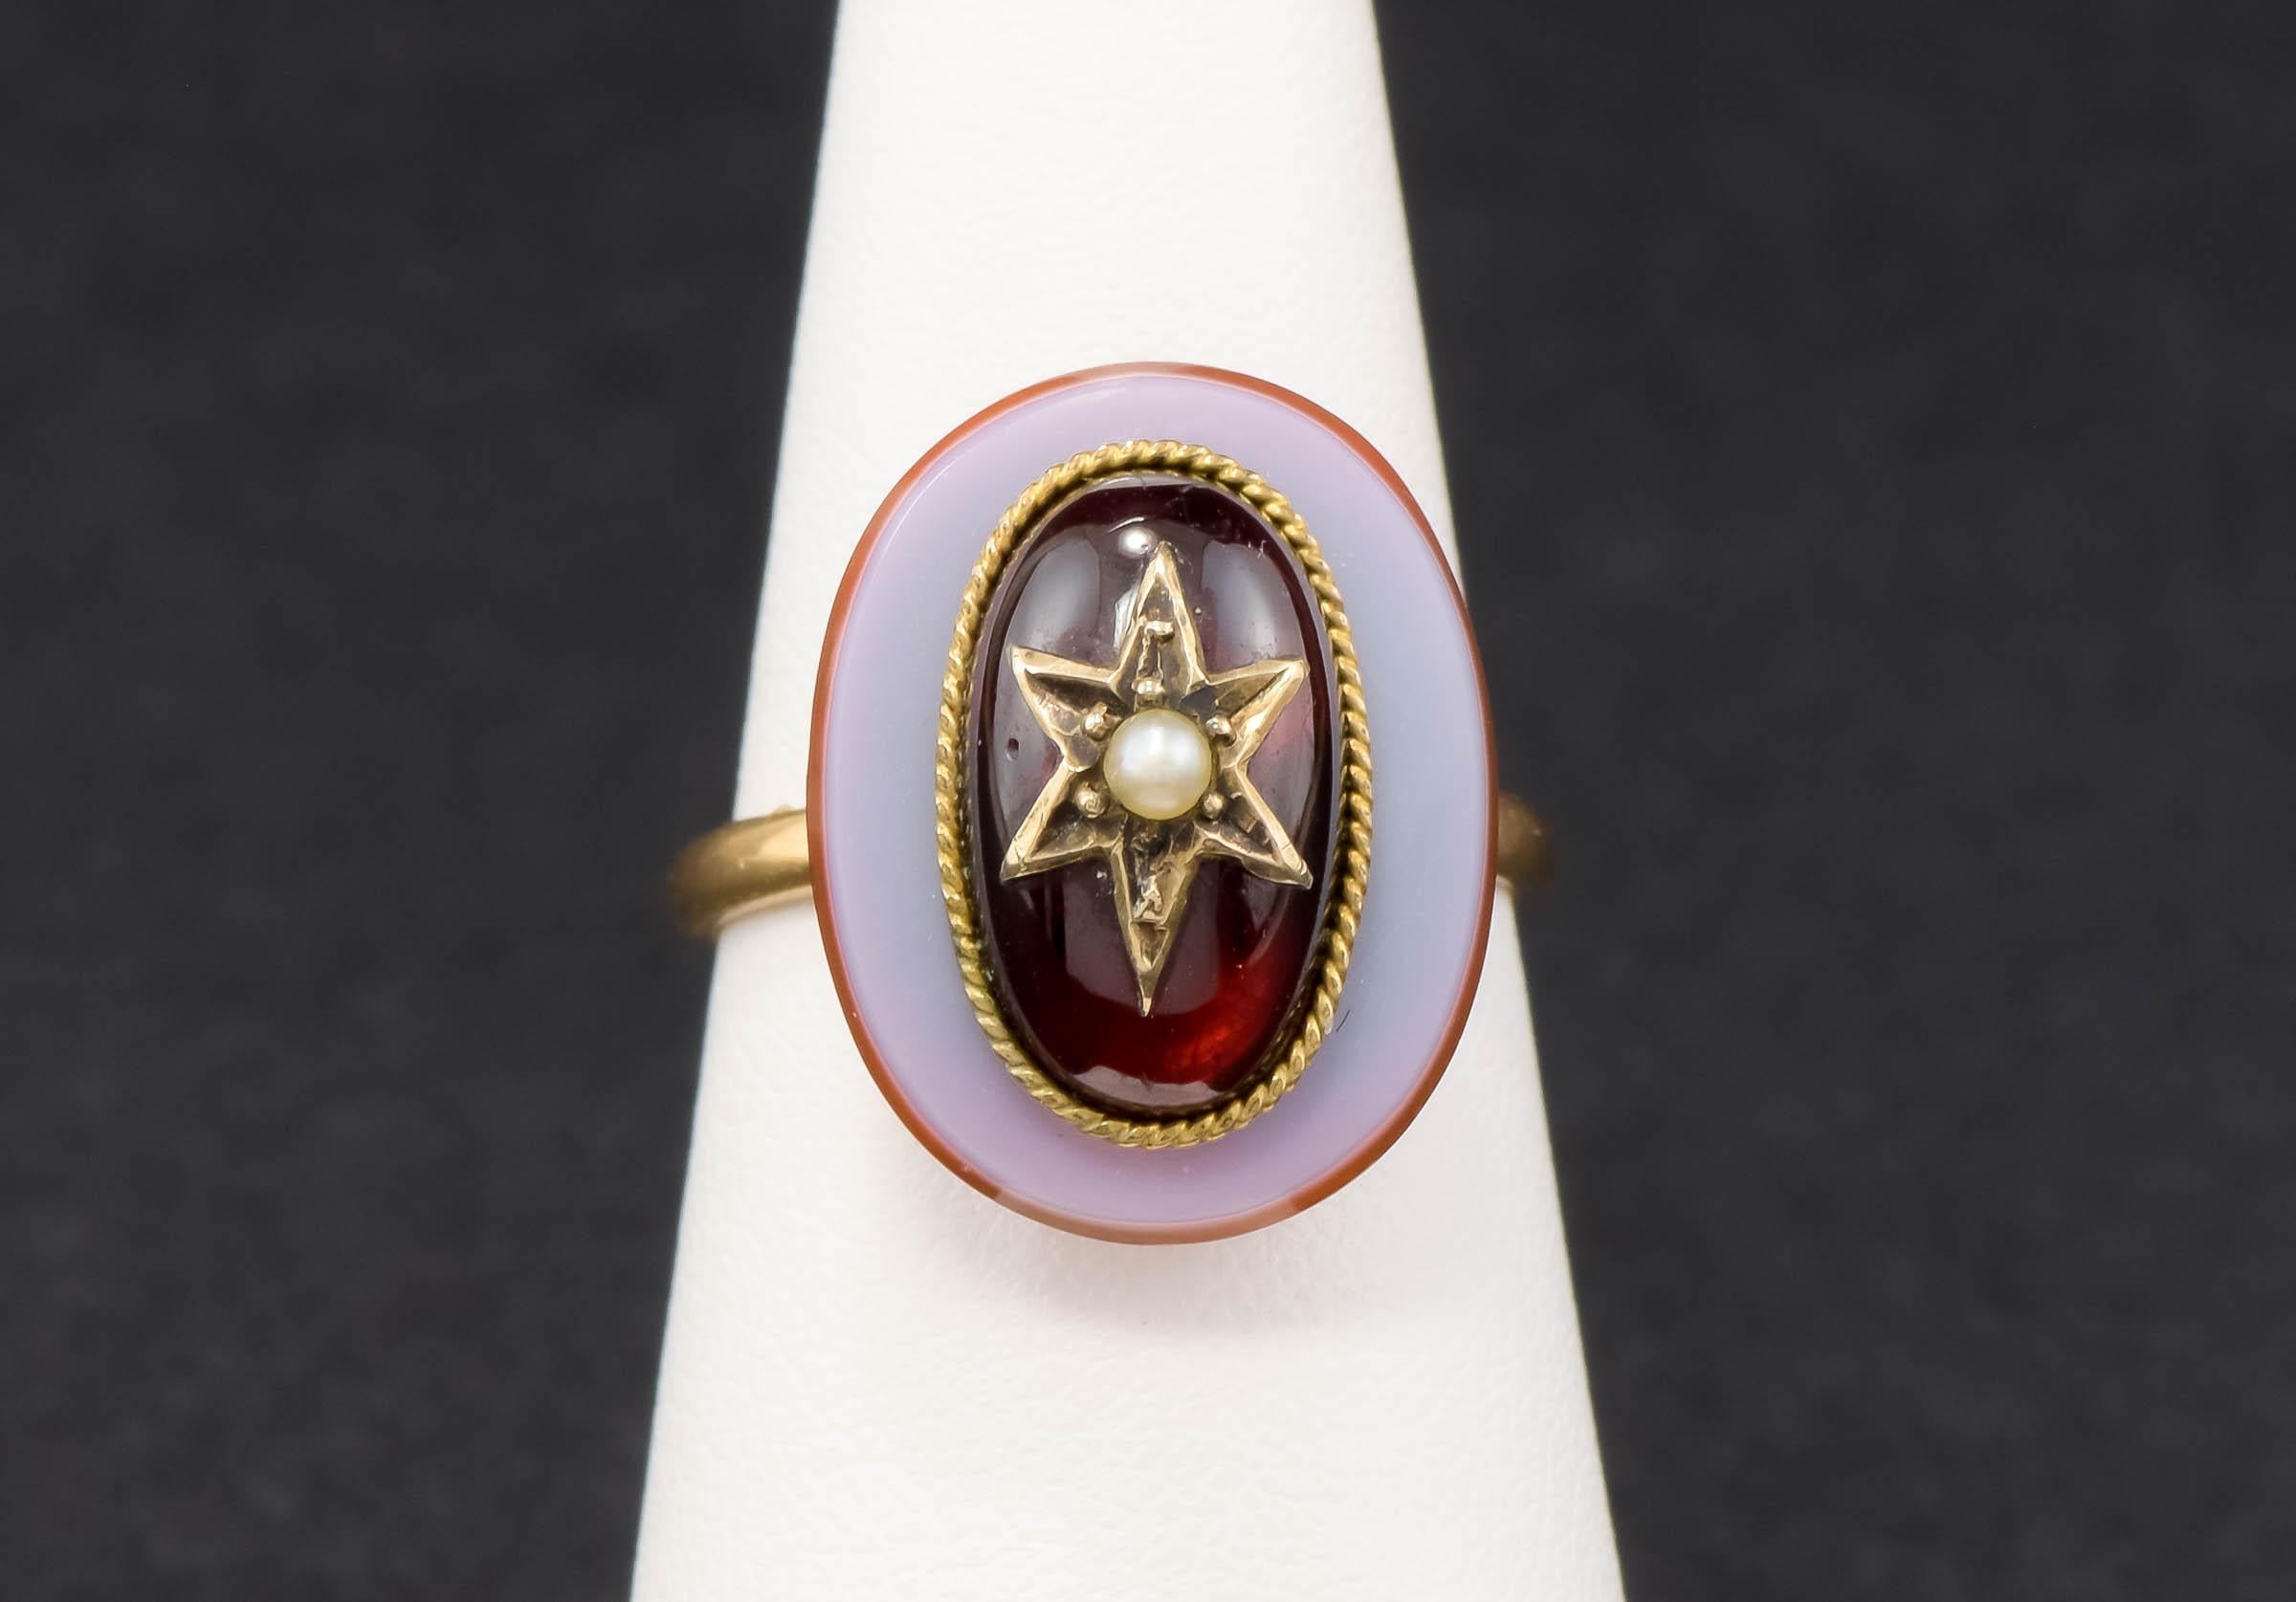 One of a kind and very striking, I found this ring while out antiquing in New England. I love the celestial Star motif and the combination of garnet, agate and pearl. It's definitely an antique conversion ring and remains in very good